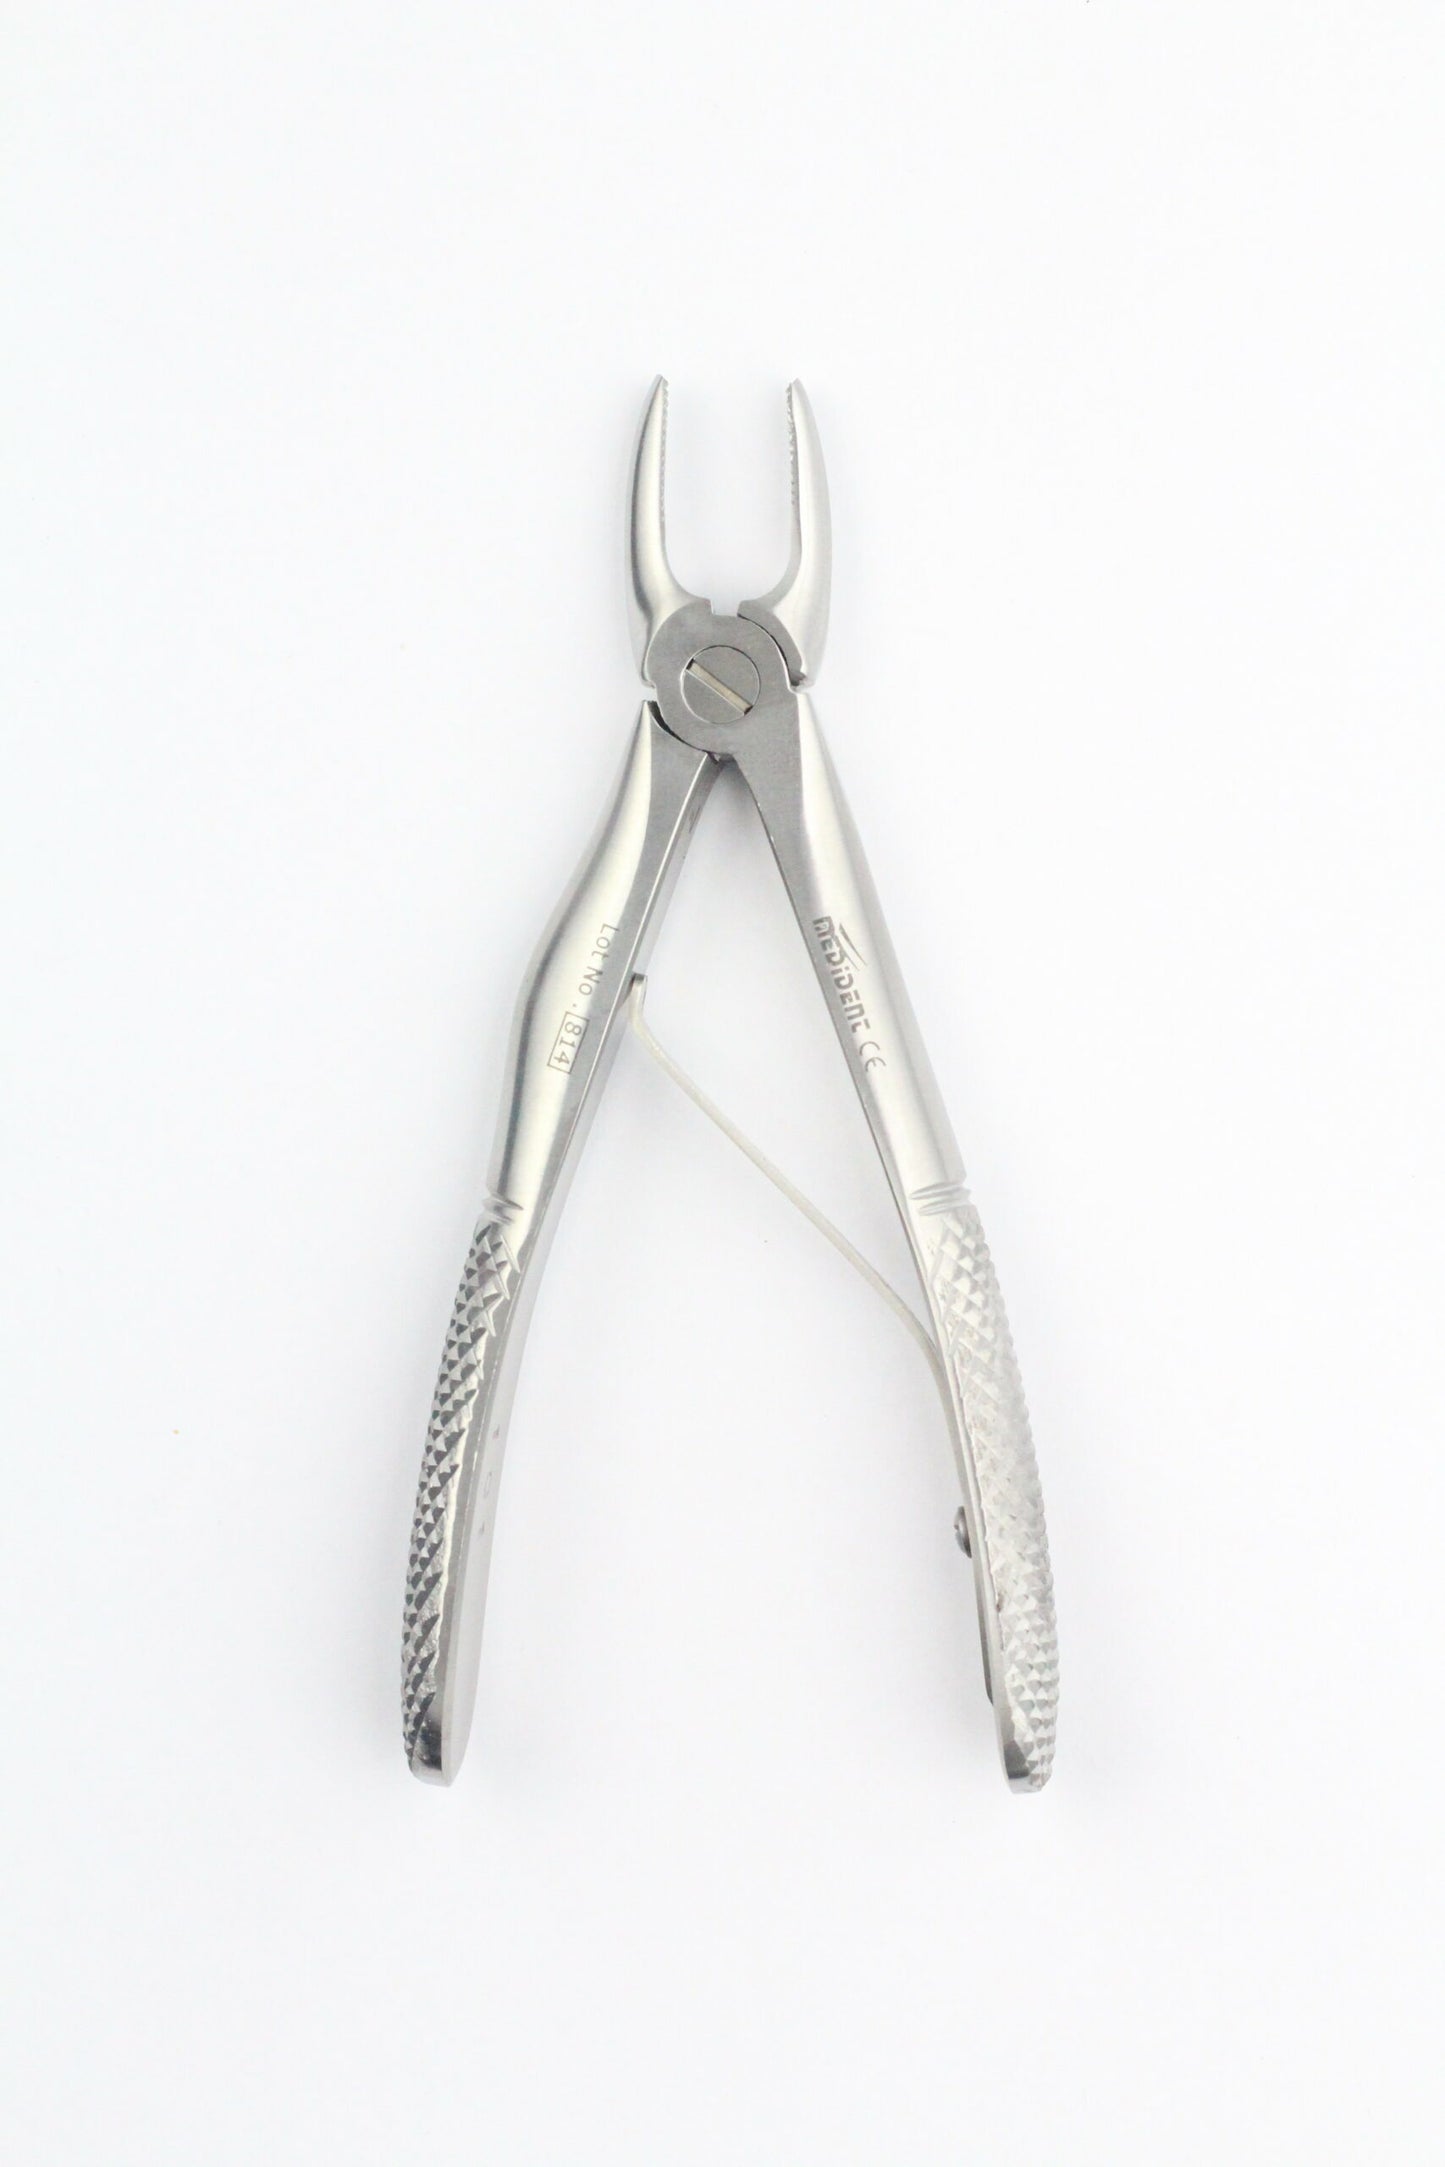 CHILDREN EXTRACTING FORCEPS FIG 101 UPPER INCISORS cod 1000-2